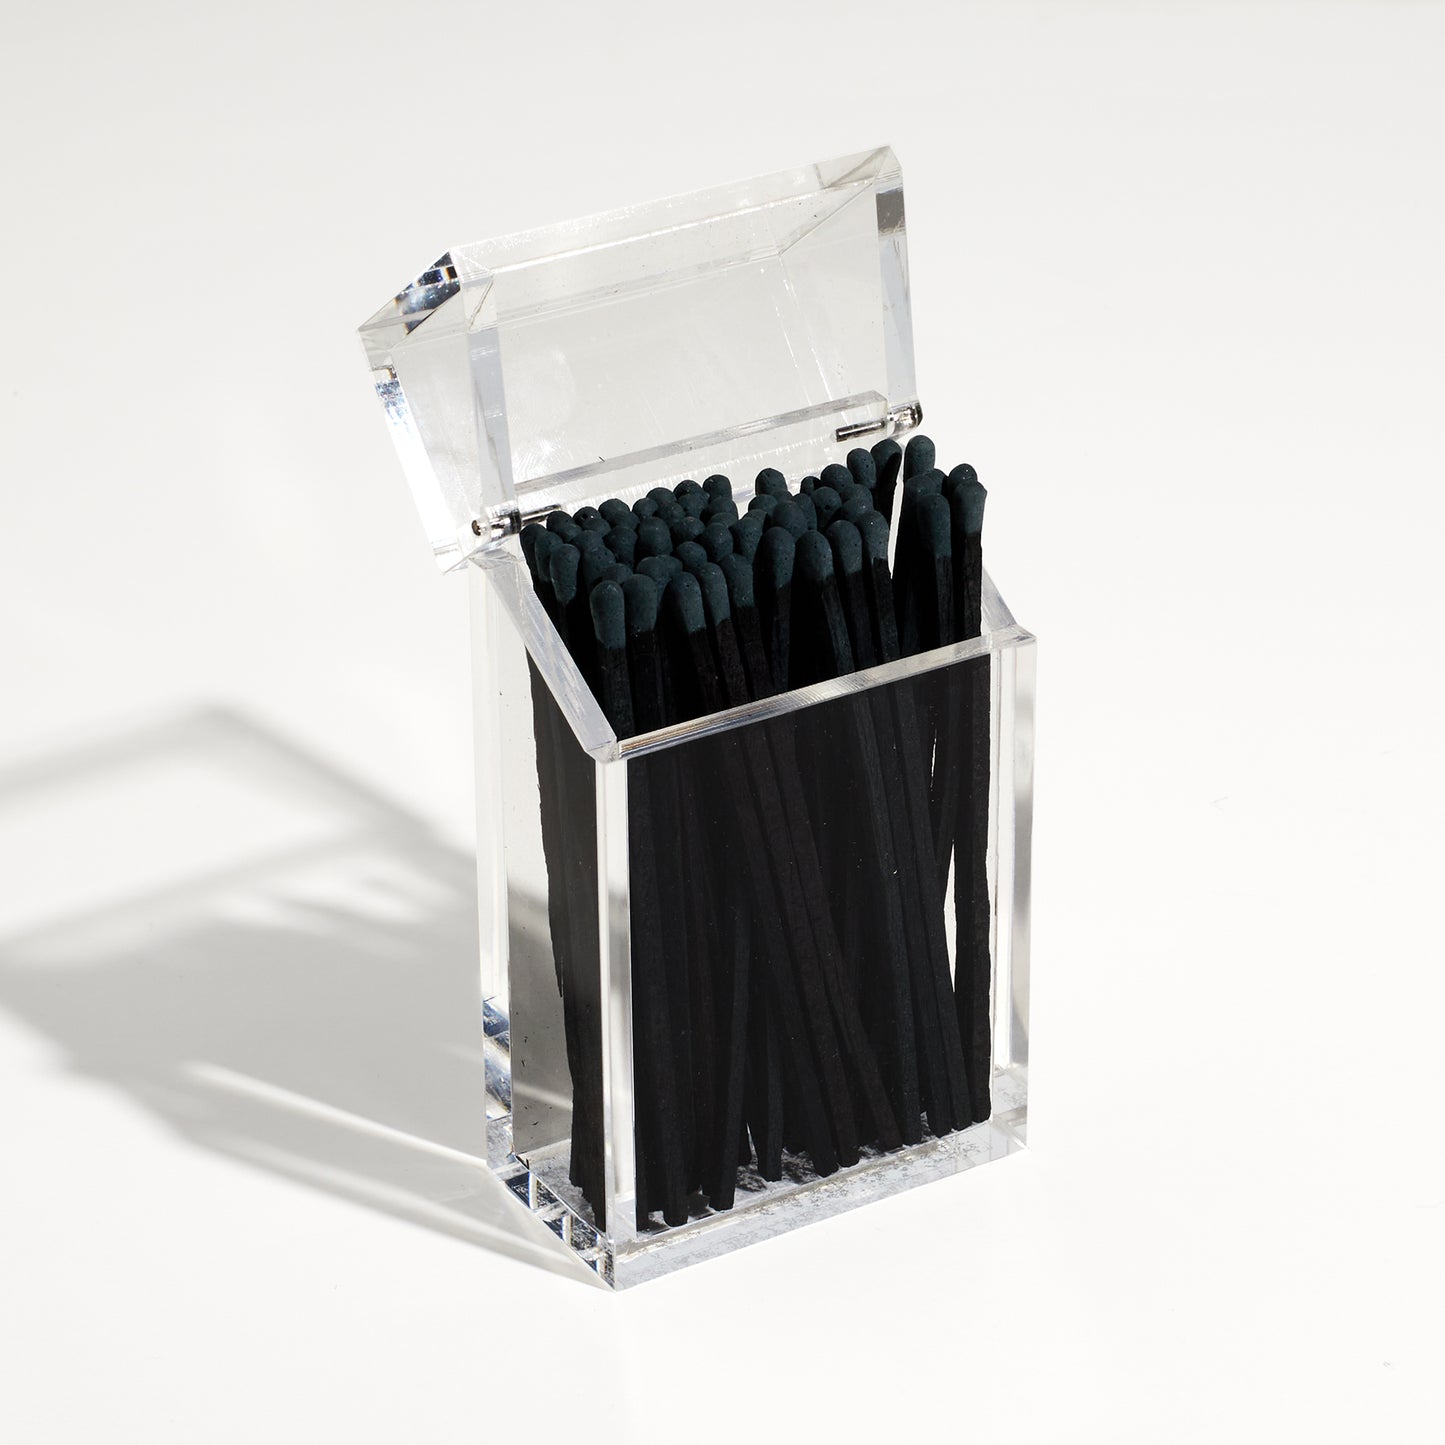 Match holder shaped like a Cigarette style acrylic case with black matches in it.